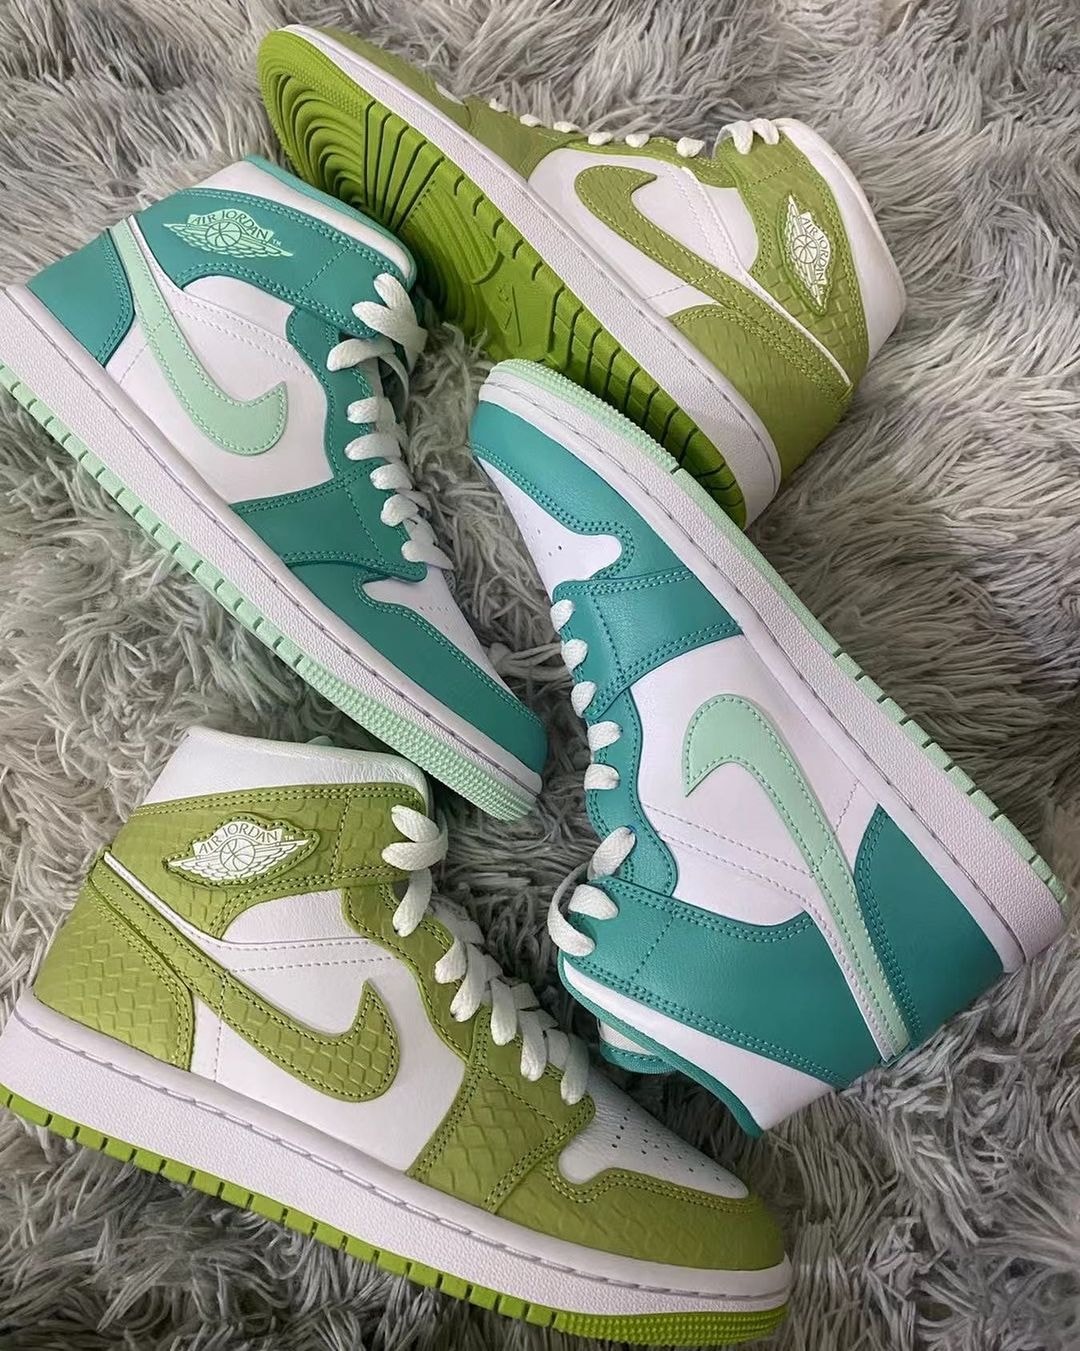 Nike Air Jordan 1 Mid Womens Green Snake Turquoise Mint Price Release Date